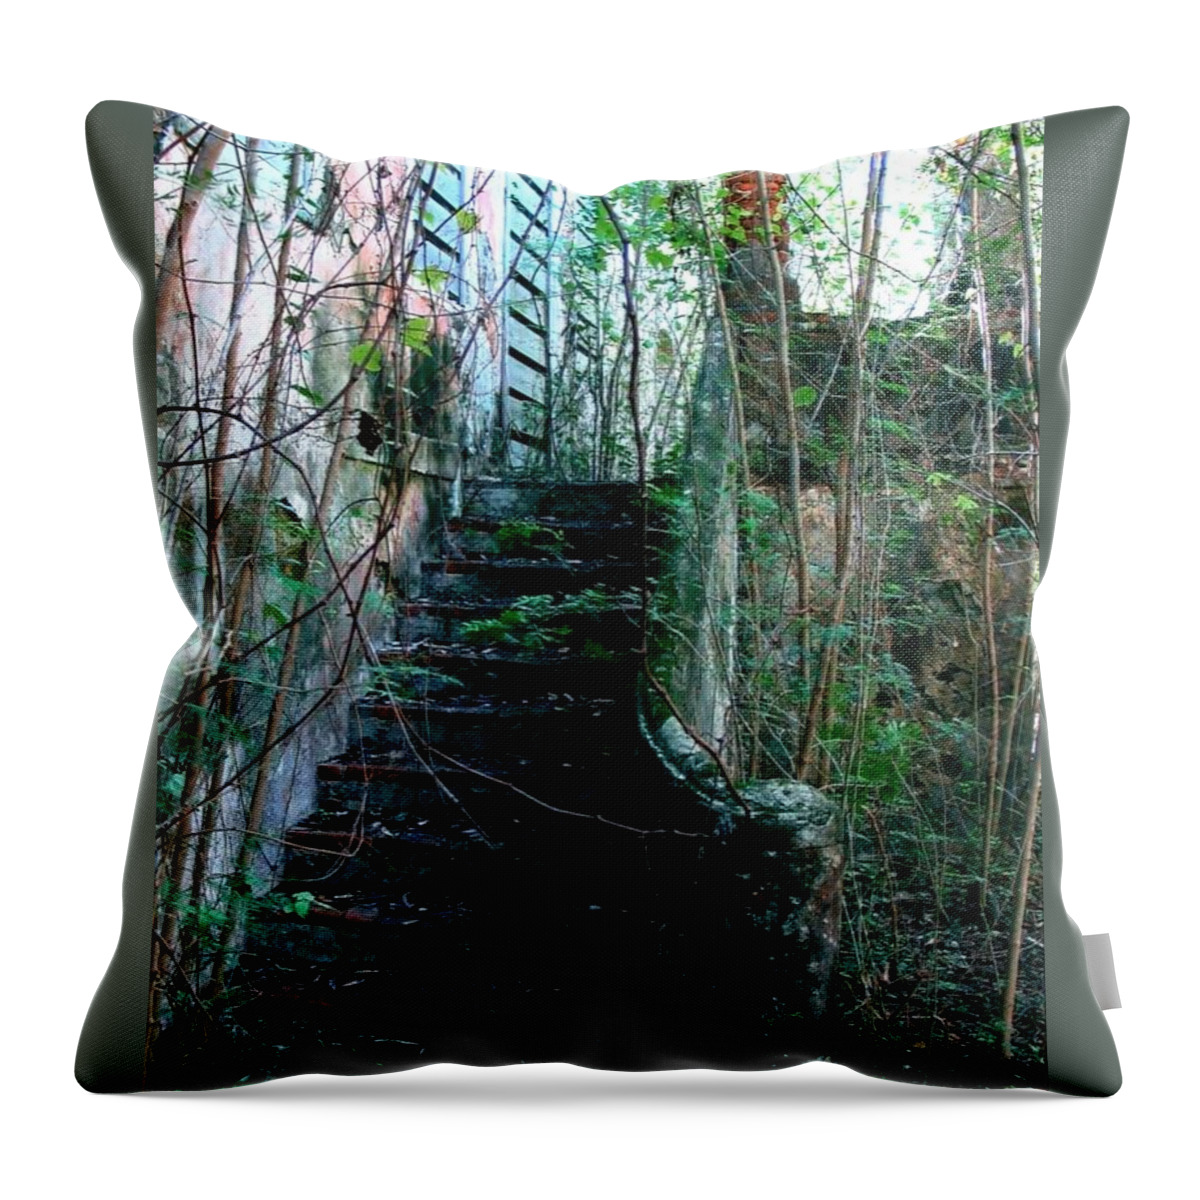 House Throw Pillow featuring the photograph Jungle House by Robert Nickologianis